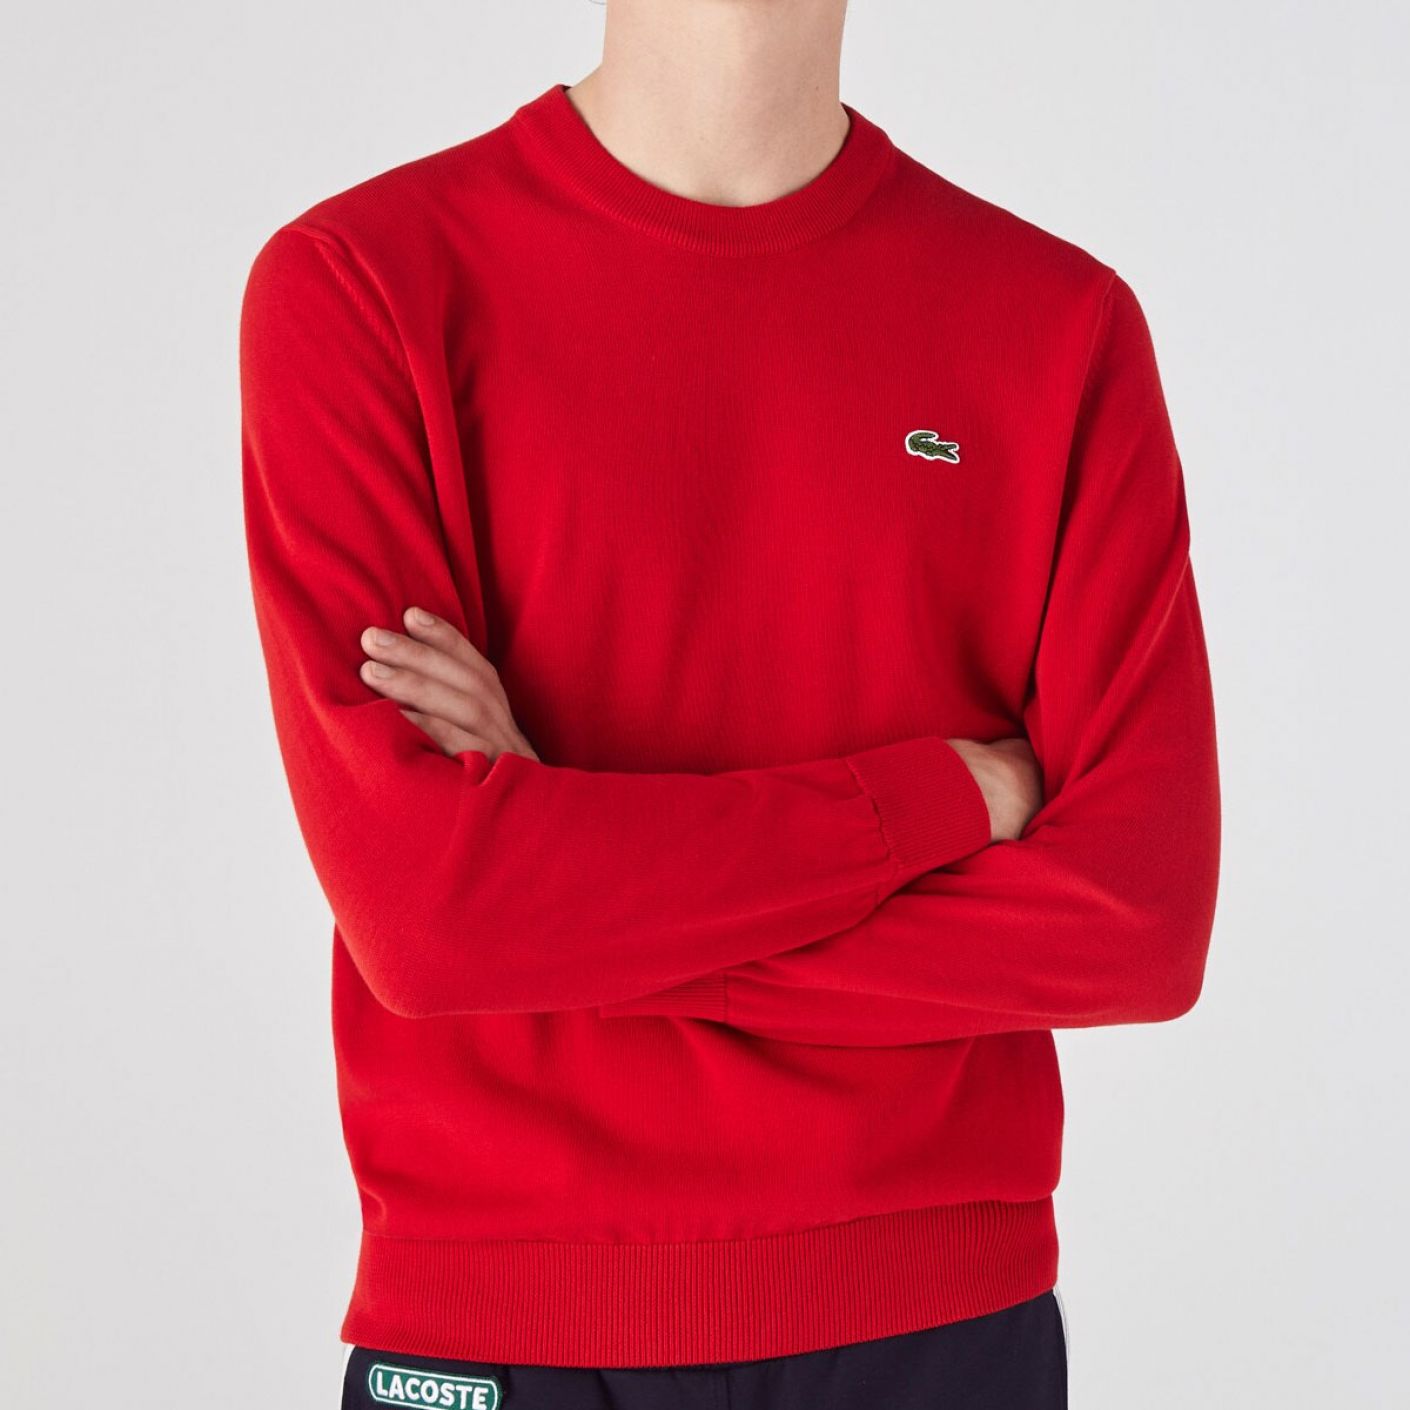 Lacoste Men's Organic Round Neck Pullover Red